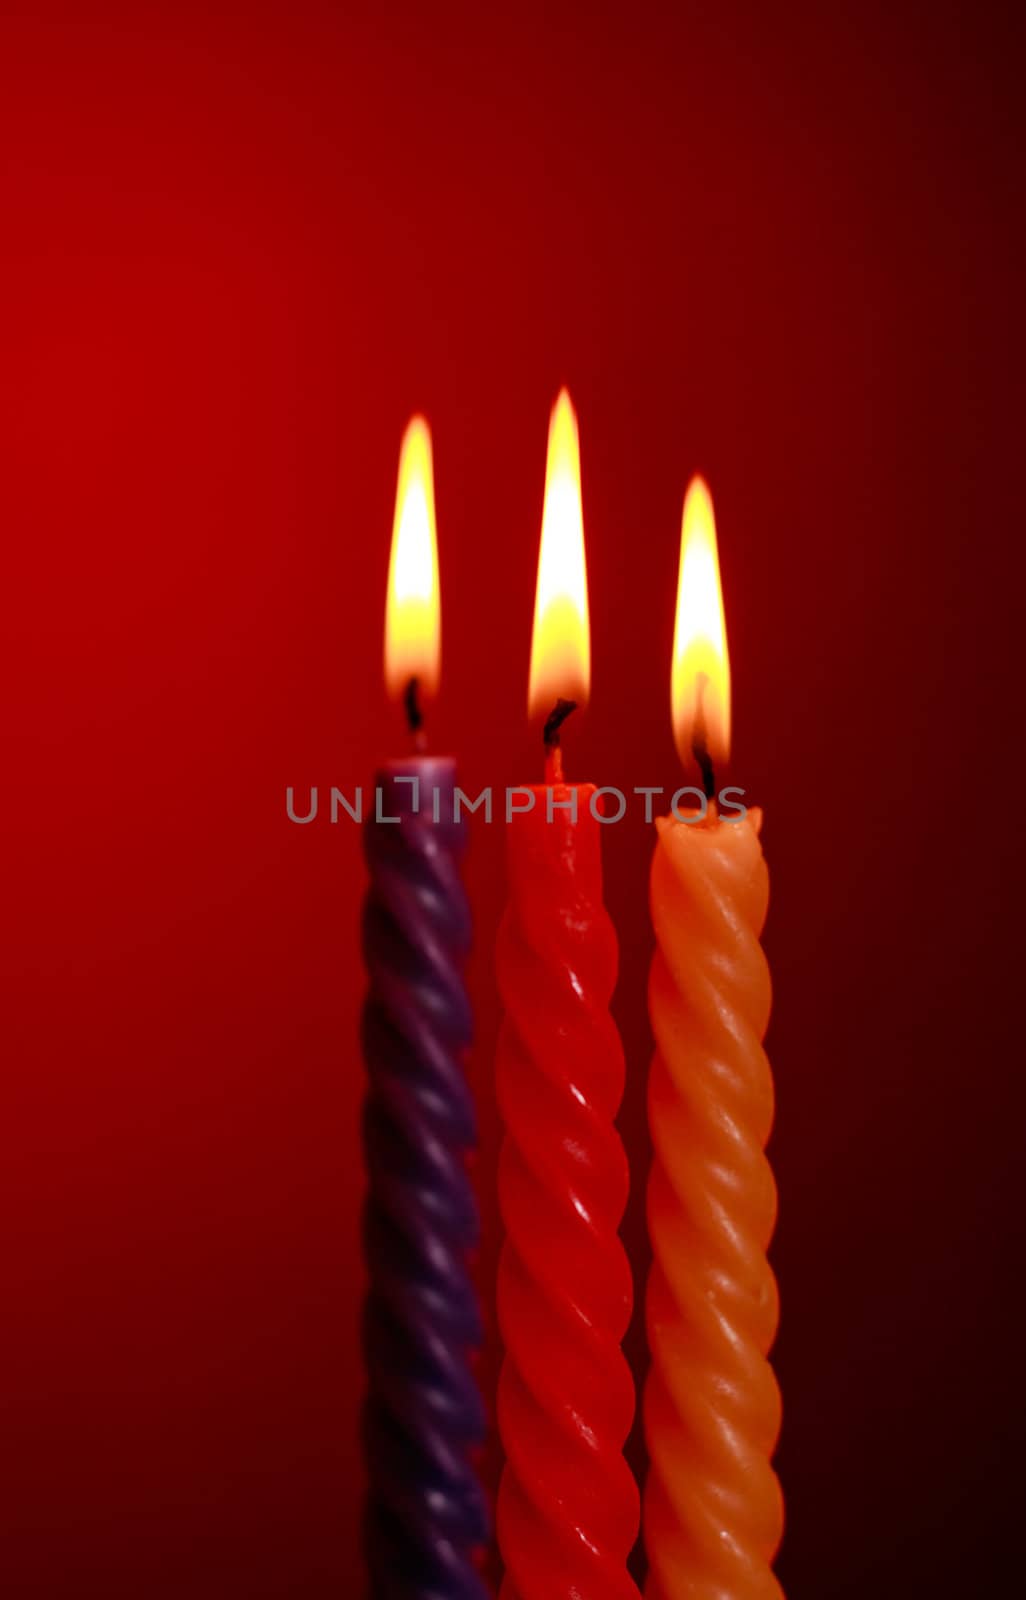 three twisted burning candles over red background